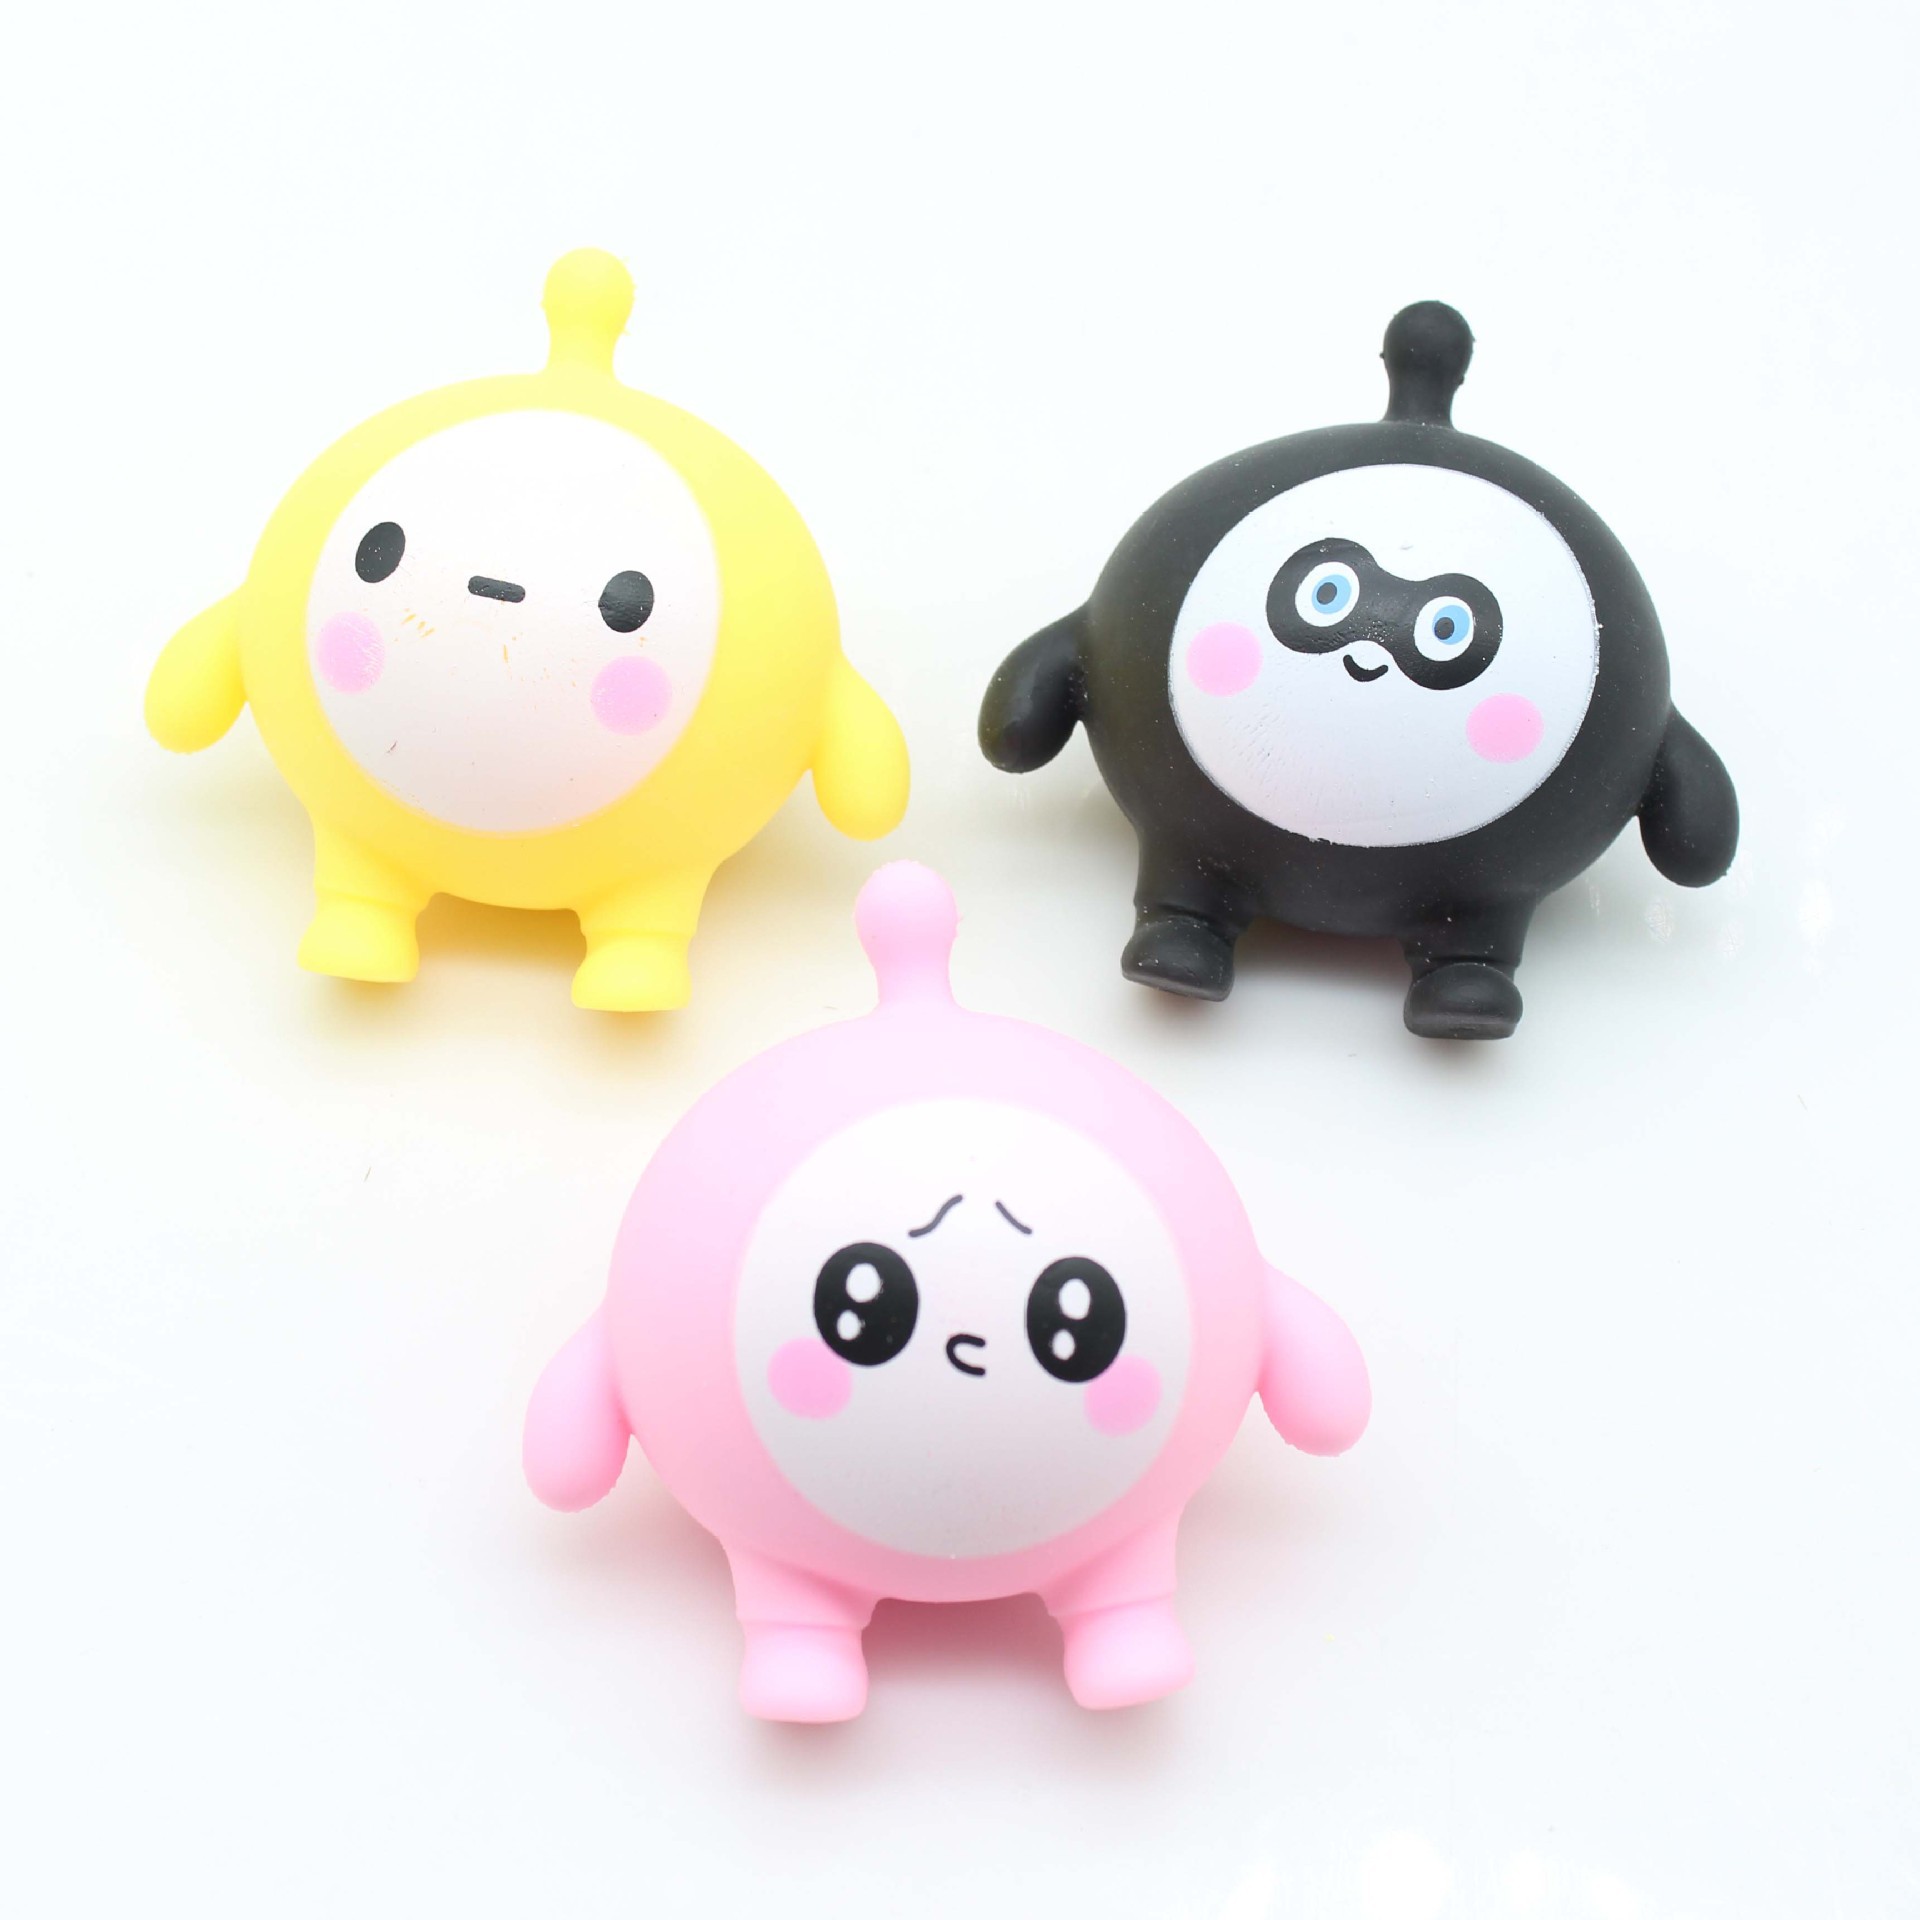 New Egg Puff Doll Cute Squeezing Toy Stress Relief Toy Stall Night Market Creative Novelty TPR Children